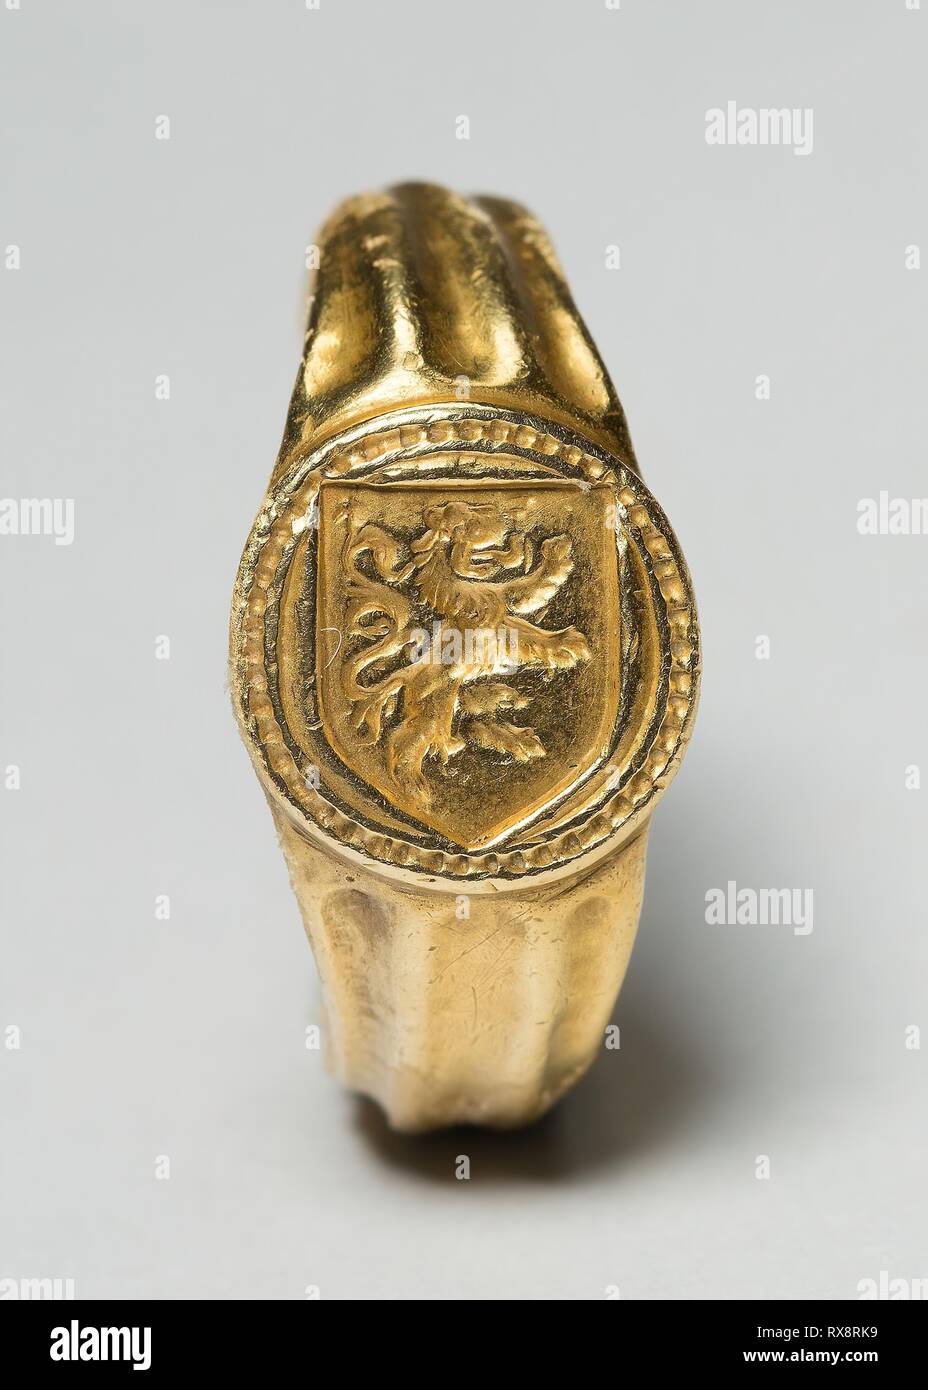 Signet Ring with a Rampant Lion. Netherlandish; probably Bruges. Date: 1475-1500. Dimensions: Circumference: 6.4 cm (2 1/2 in.); Diameter: 2 cm (3/4 in.). Gold. Origin: Bruges. Museum: The Chicago Art Institute. Stock Photo